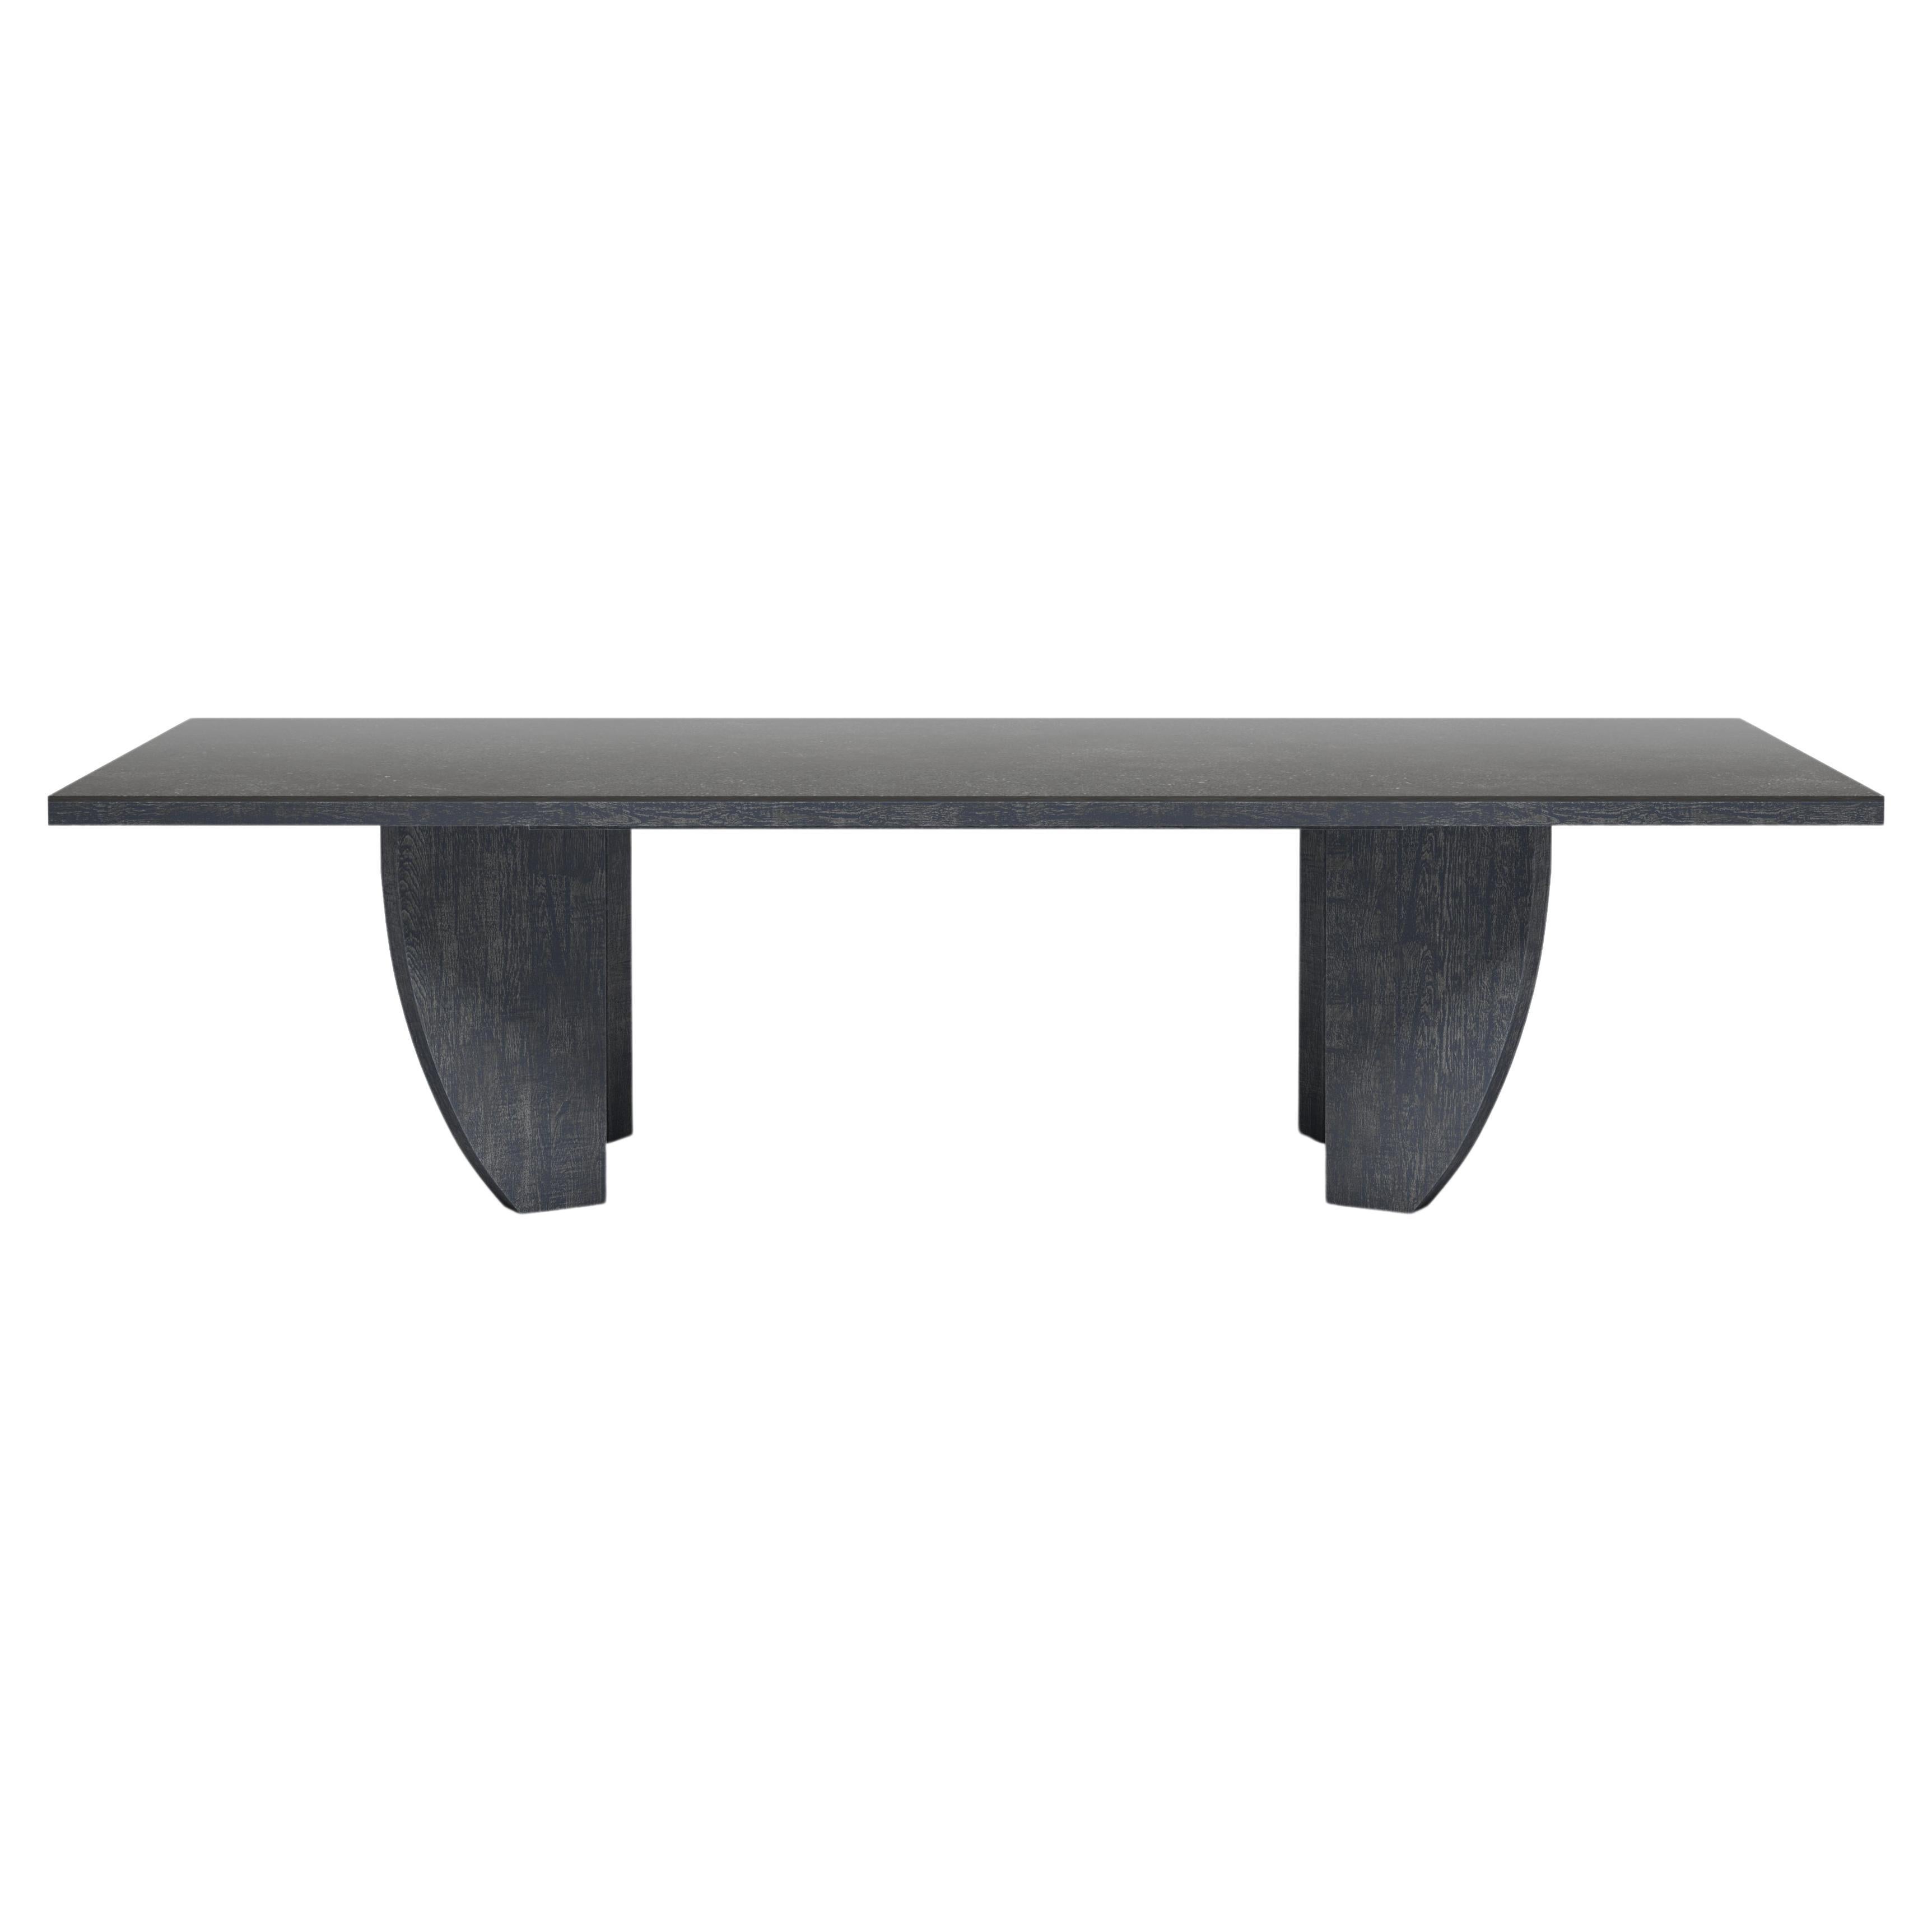 Ralph-noche Outdoor Dining Table by Snoc